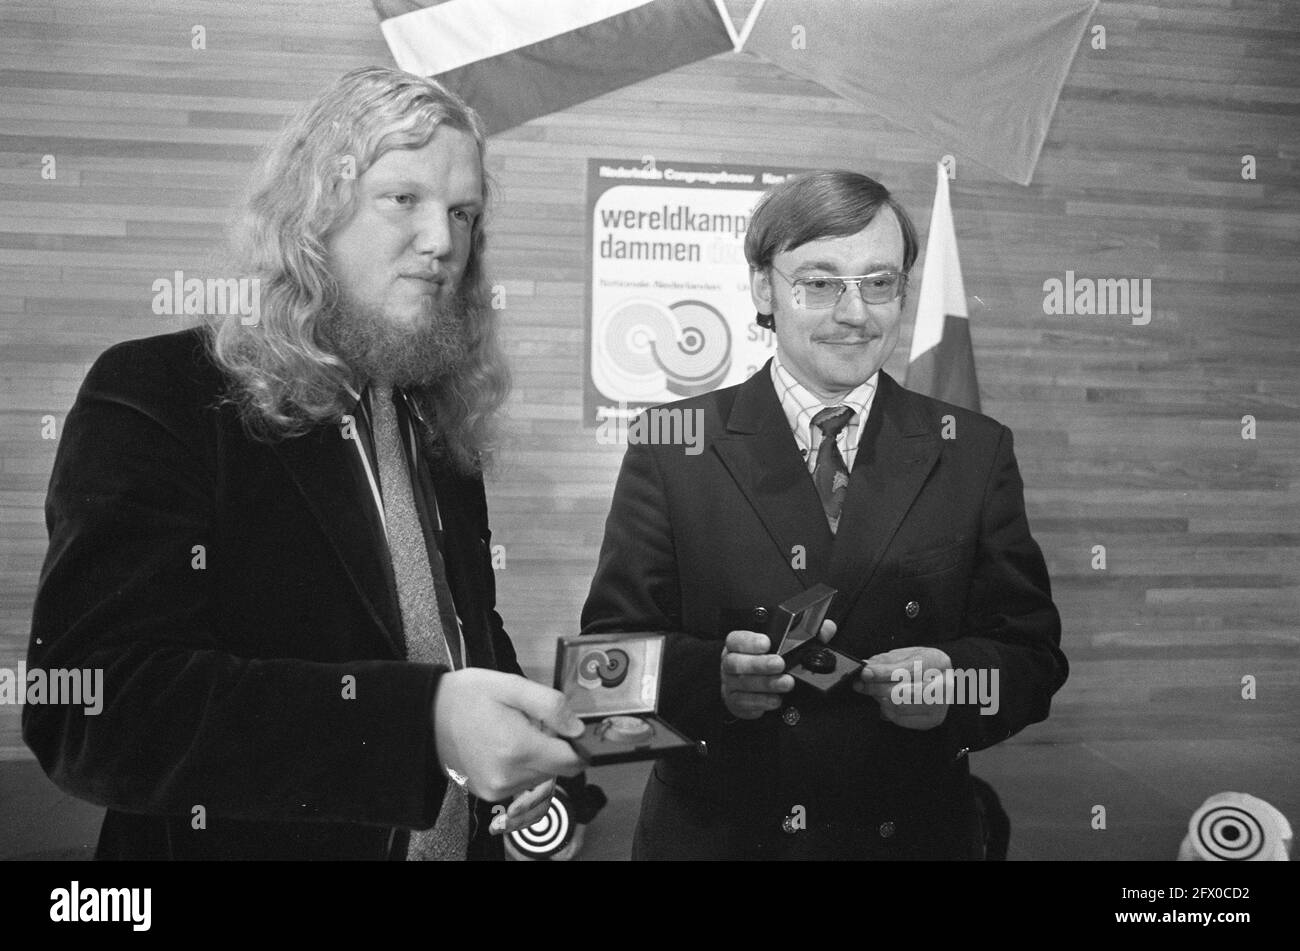 Sijbrands (left) and Andreiko draw lots for World Draughts Championships in The Hague, - National Archives - 926-7164, The Netherlands, 20th century press agency photo, news to remember, documentary, historic photography 1945-1990, visual stories, human history of the Twentieth Century, capturing moments in time Stock Photo